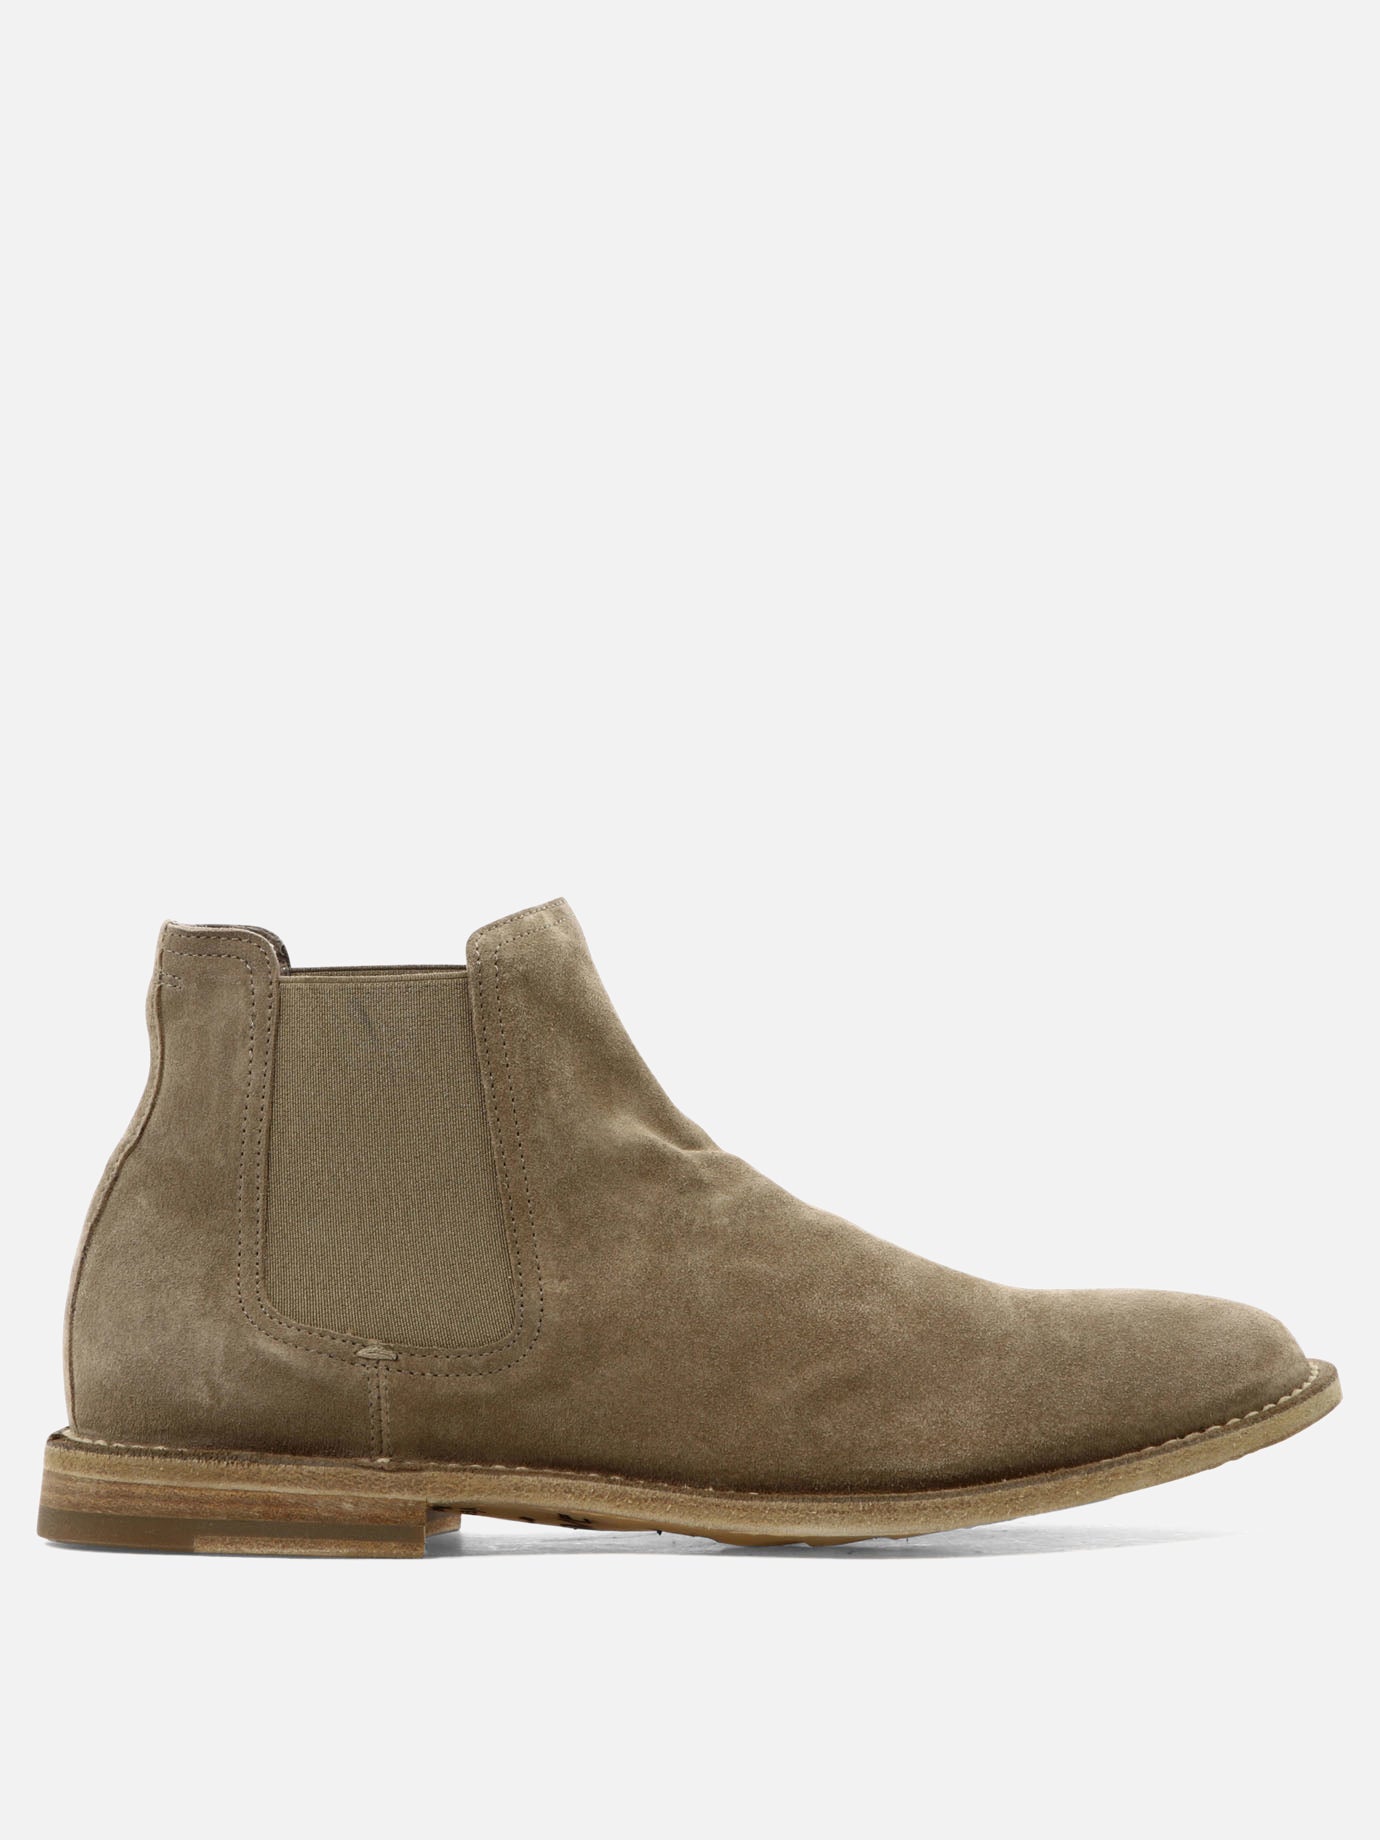 "Steple" ankle boots